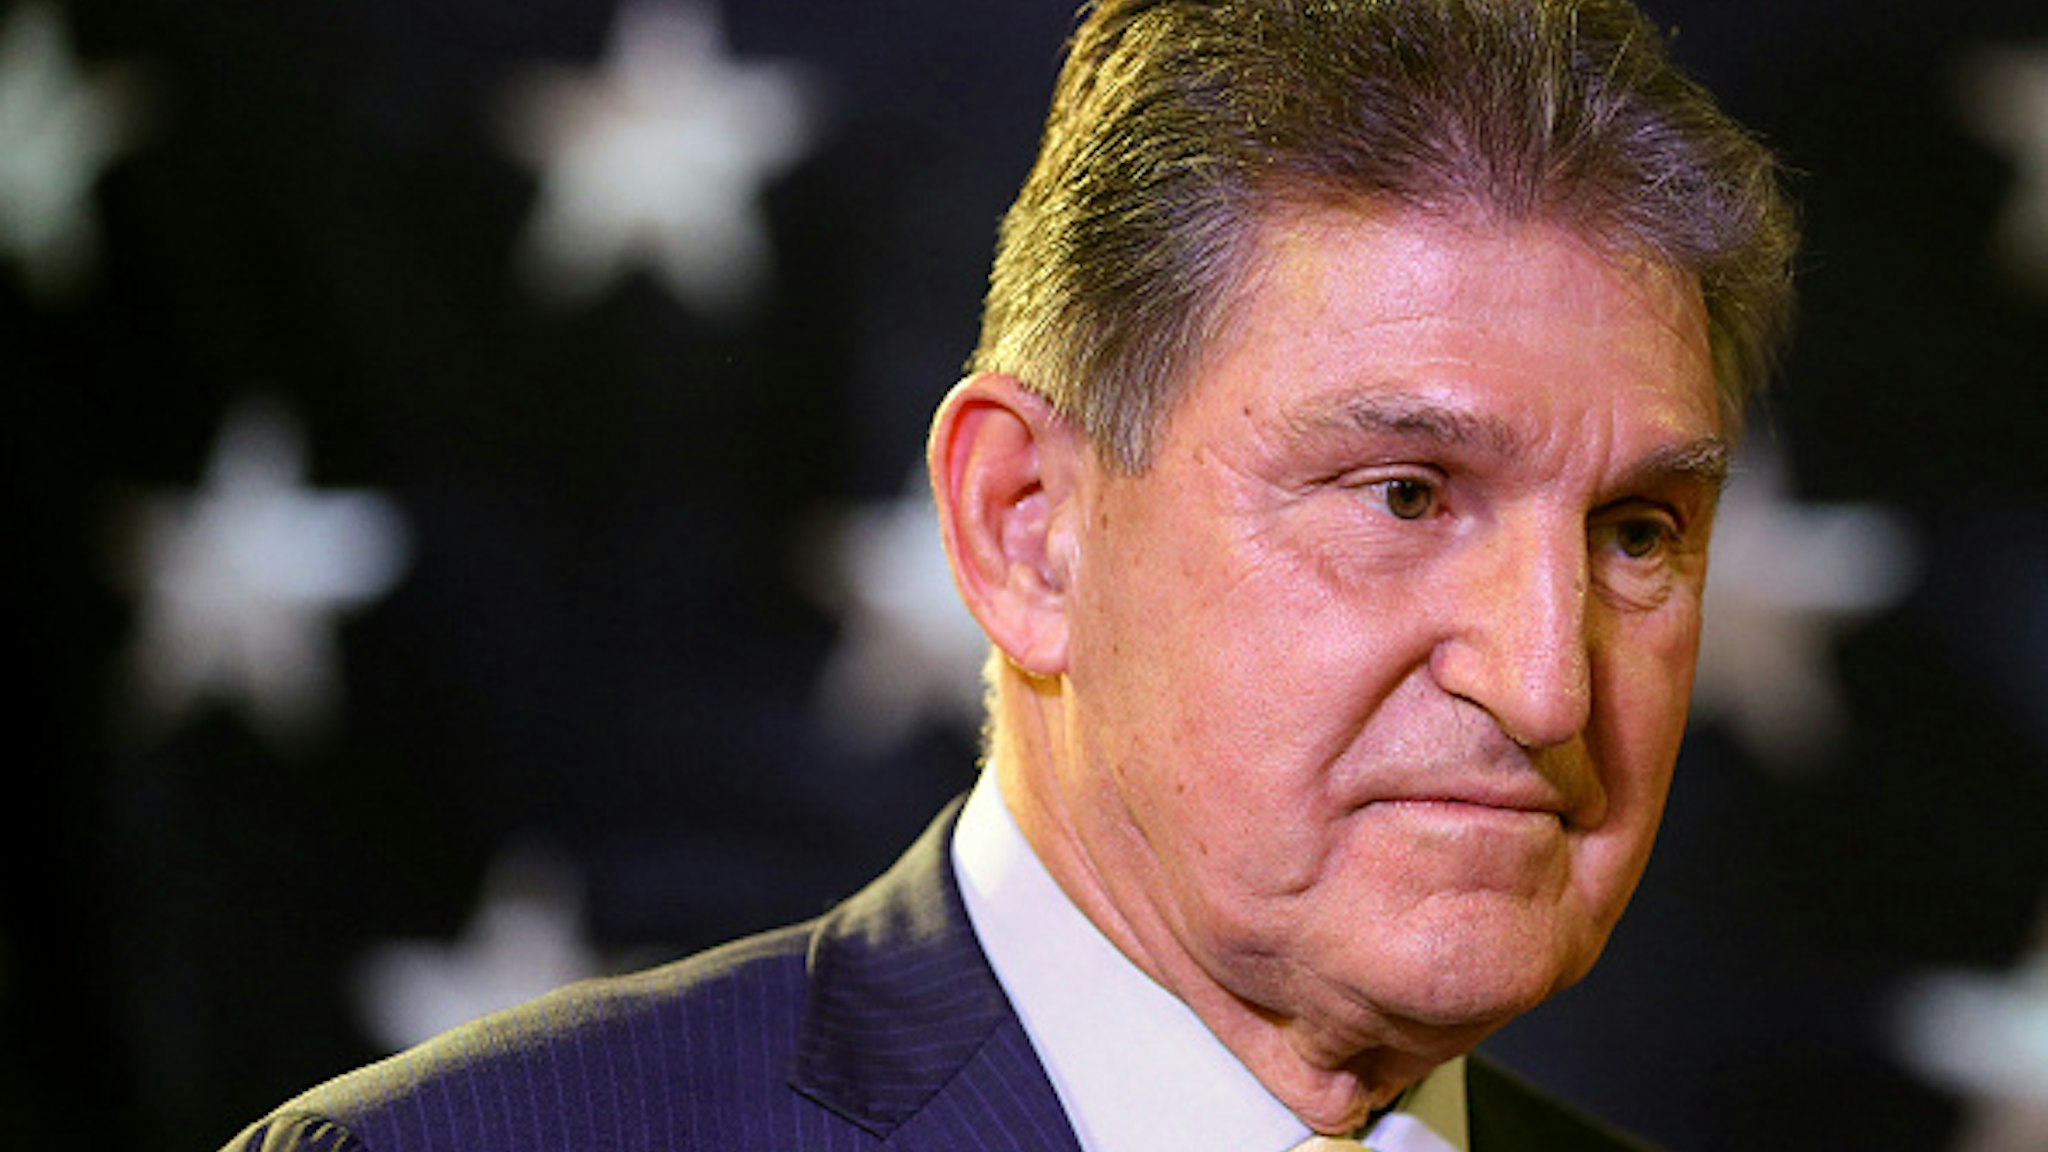 CHARLESTON, WV - NOVEMBER 06: Sen. Joe Manchin (D-WV) celebrates at his election day victory party at the Embassy Suites on November 6, 2018 in Charleston, West Virginia. Manchin won his second full Senate term after he defeated West Virginia Republican Senate Candidate Patrick Morrisey